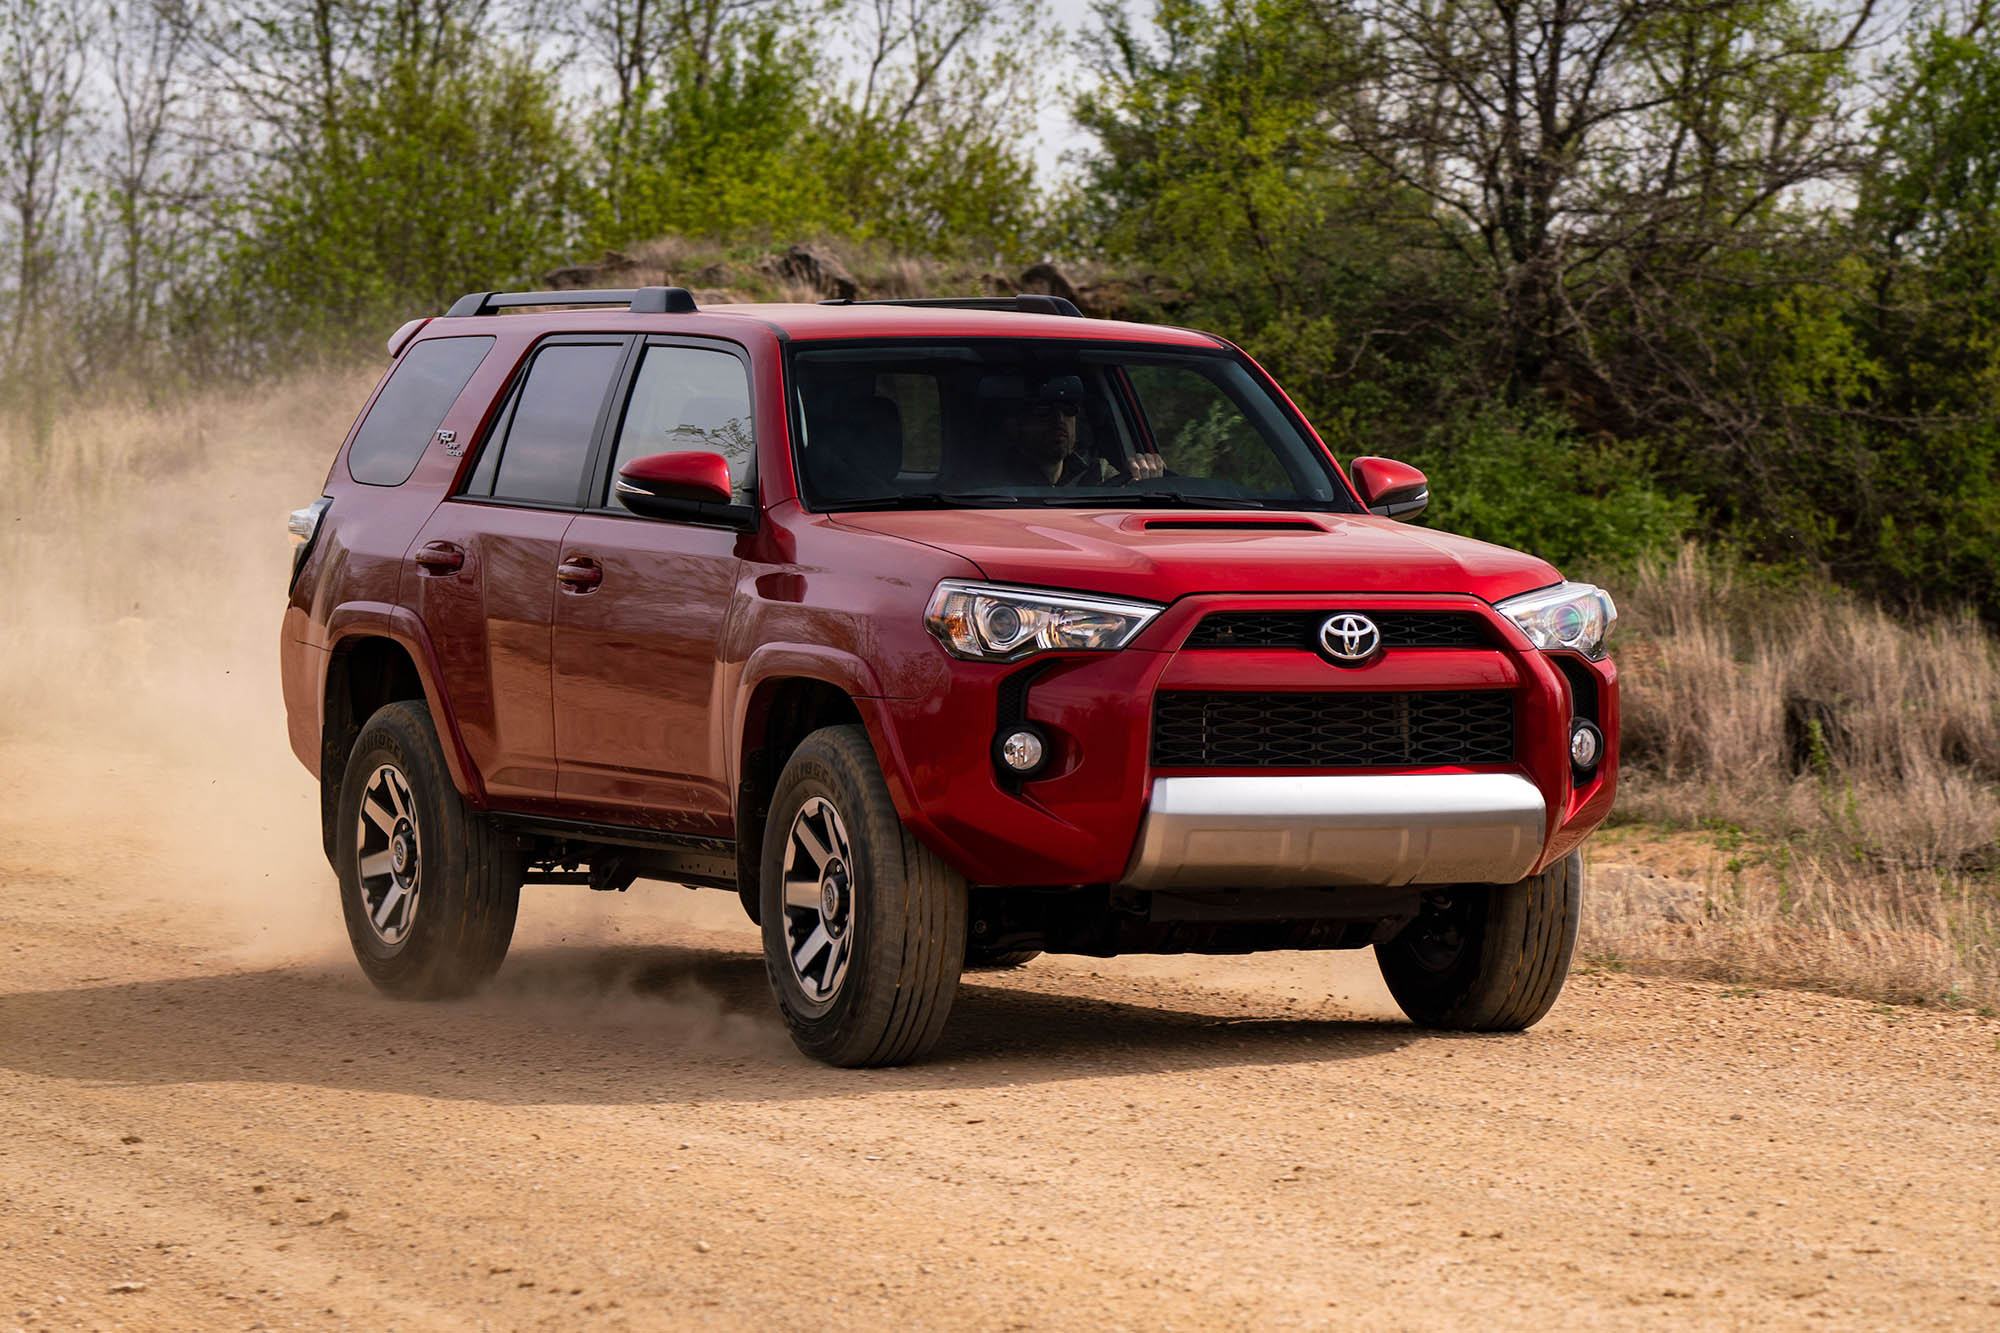 Red 2019 Toyota 4Runner driving on a dirt road